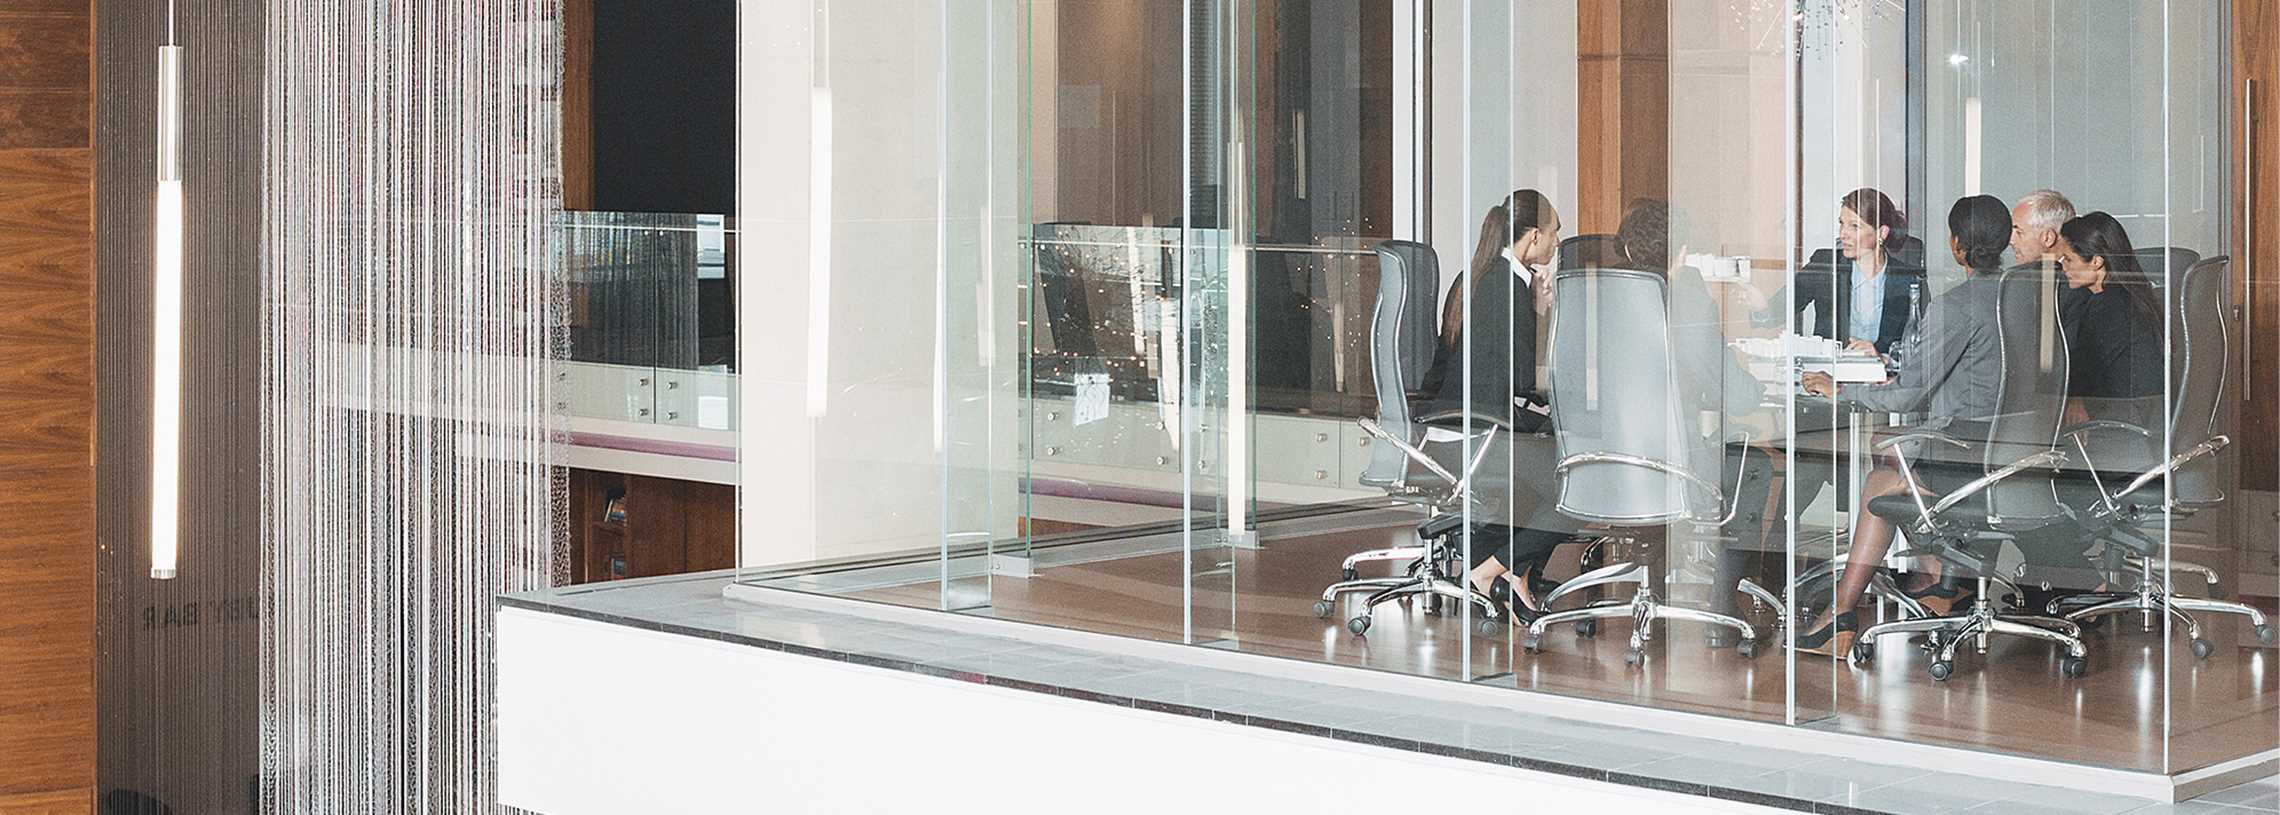 Glass meeting room in modern office.